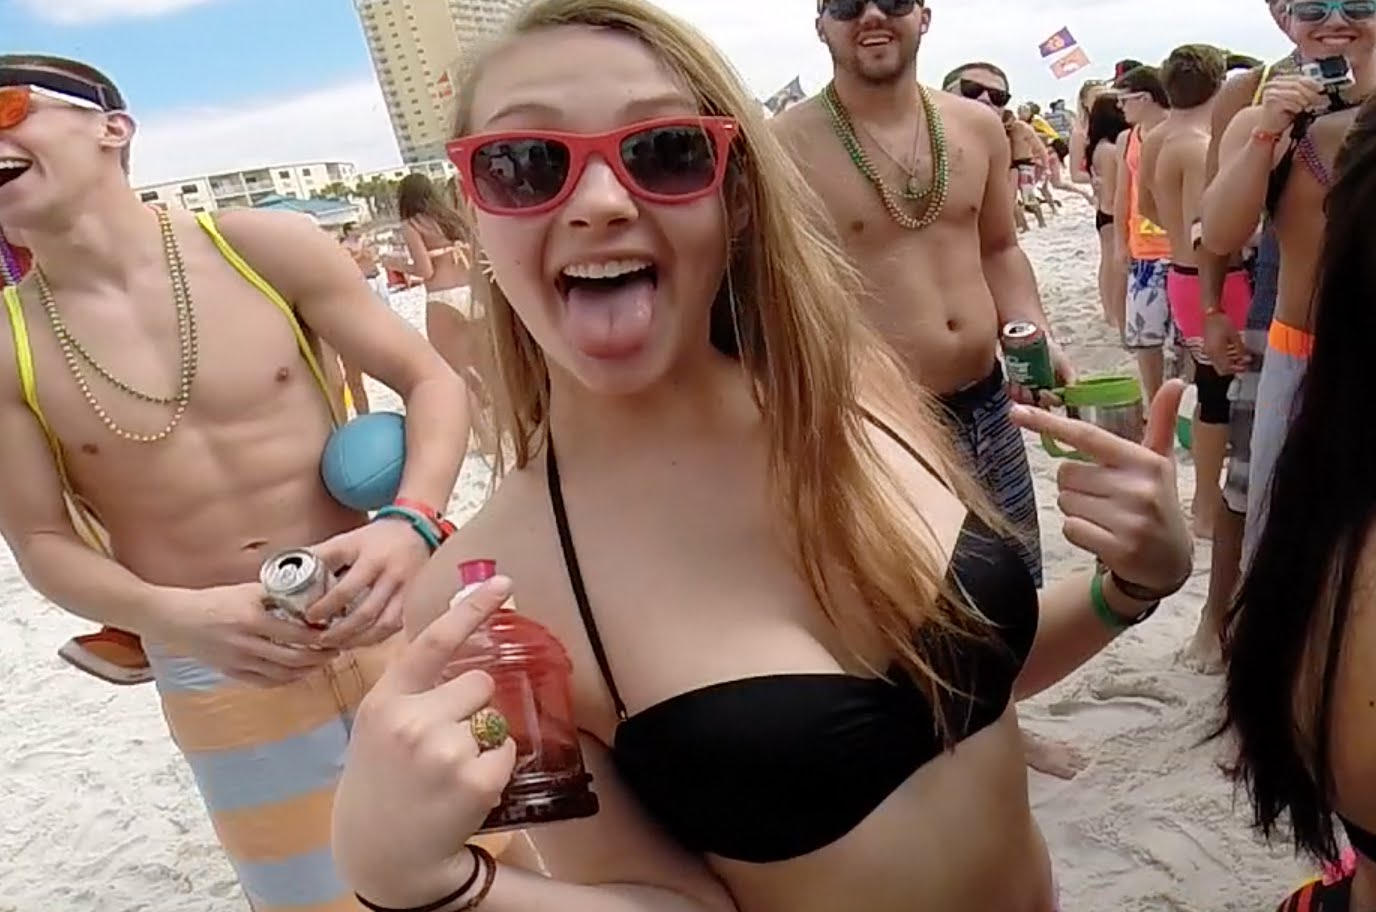 Guy Goes Around Asking Spring Break Girls If They Want To Have Sex With Him...